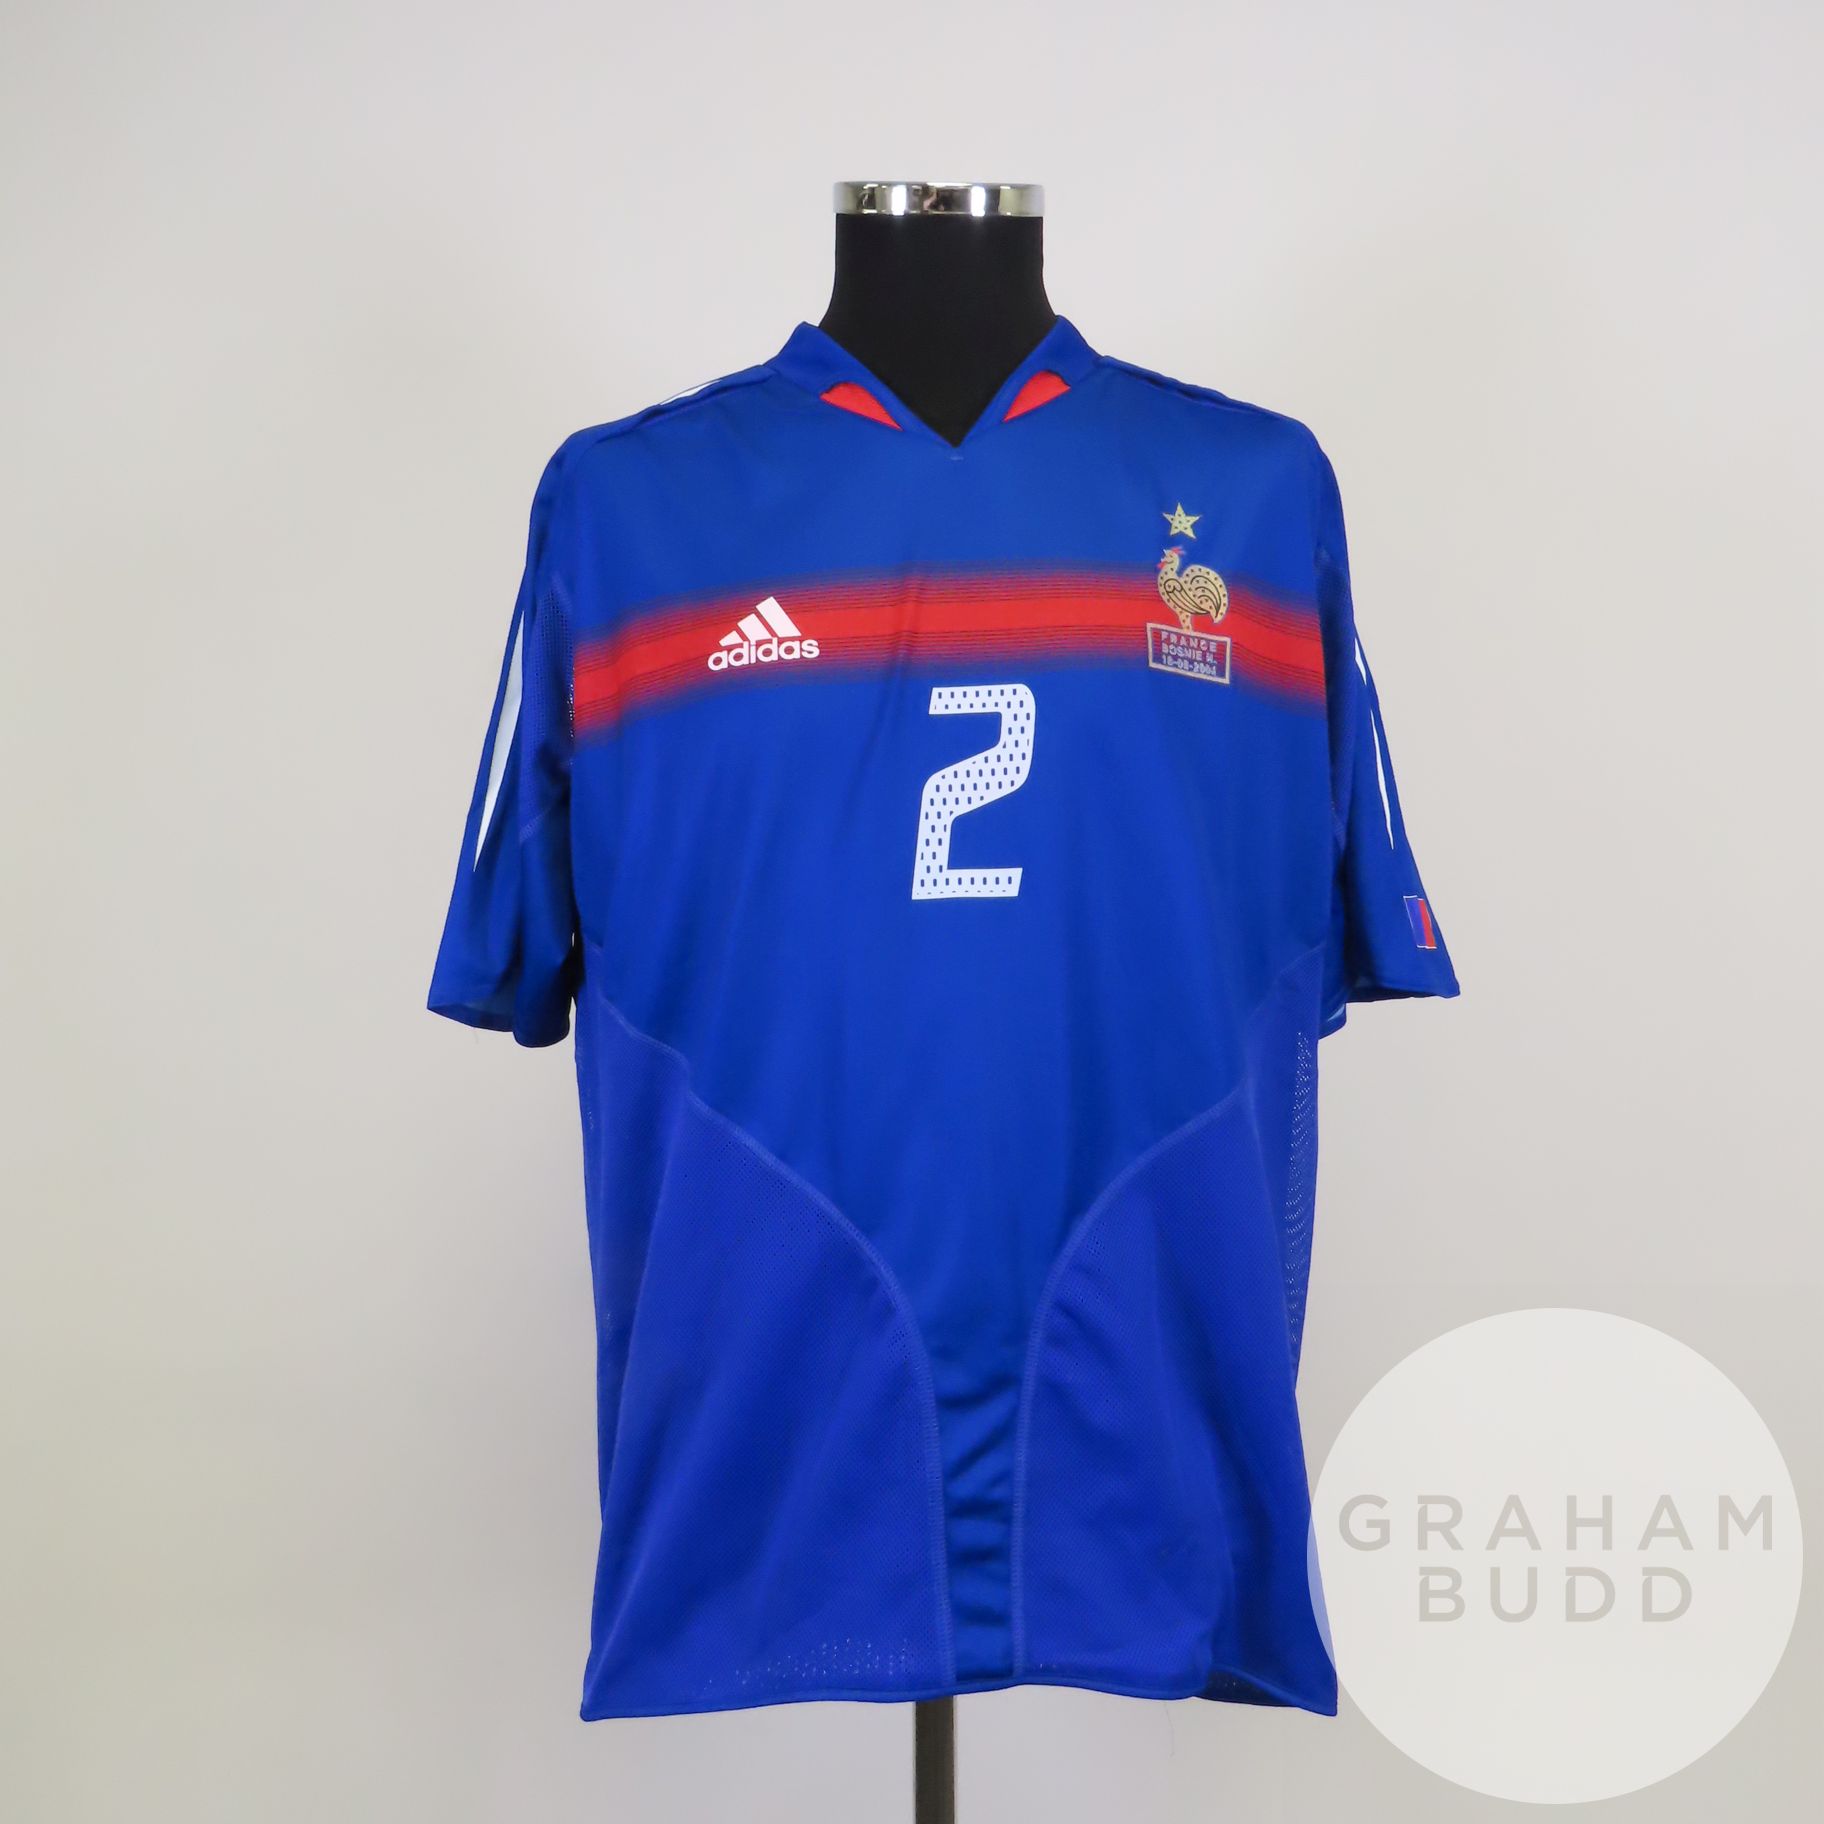 Jean-Alain Boumsong blue and red No.2 France match issued short-sleeved shirt, 2004